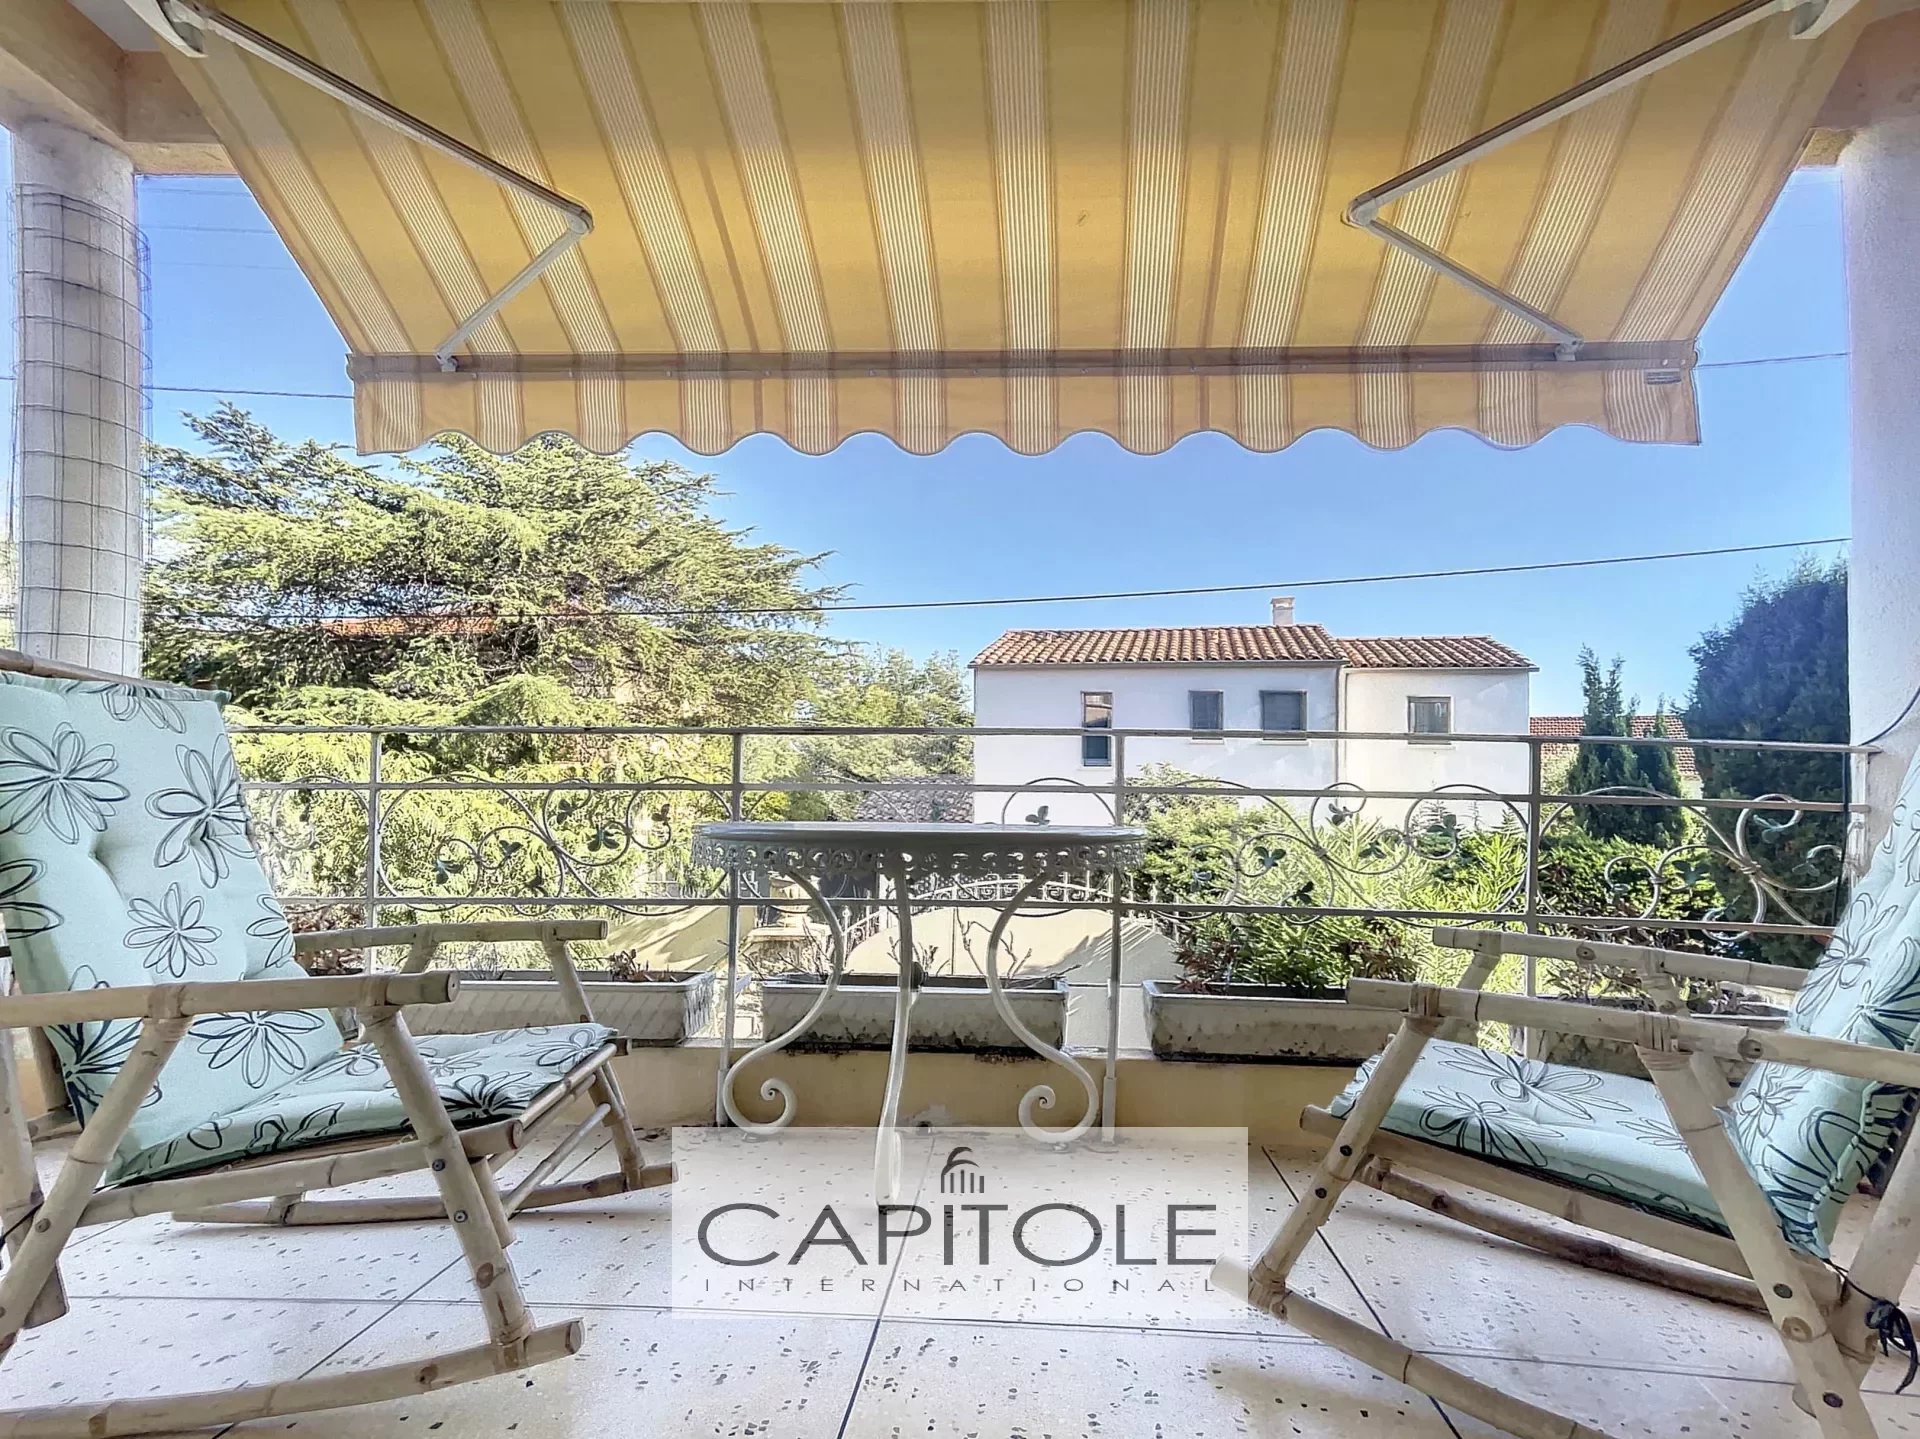 ANTIBES - For sale - Semi-detached house with south facing terrace, calm residential area , close to the sea